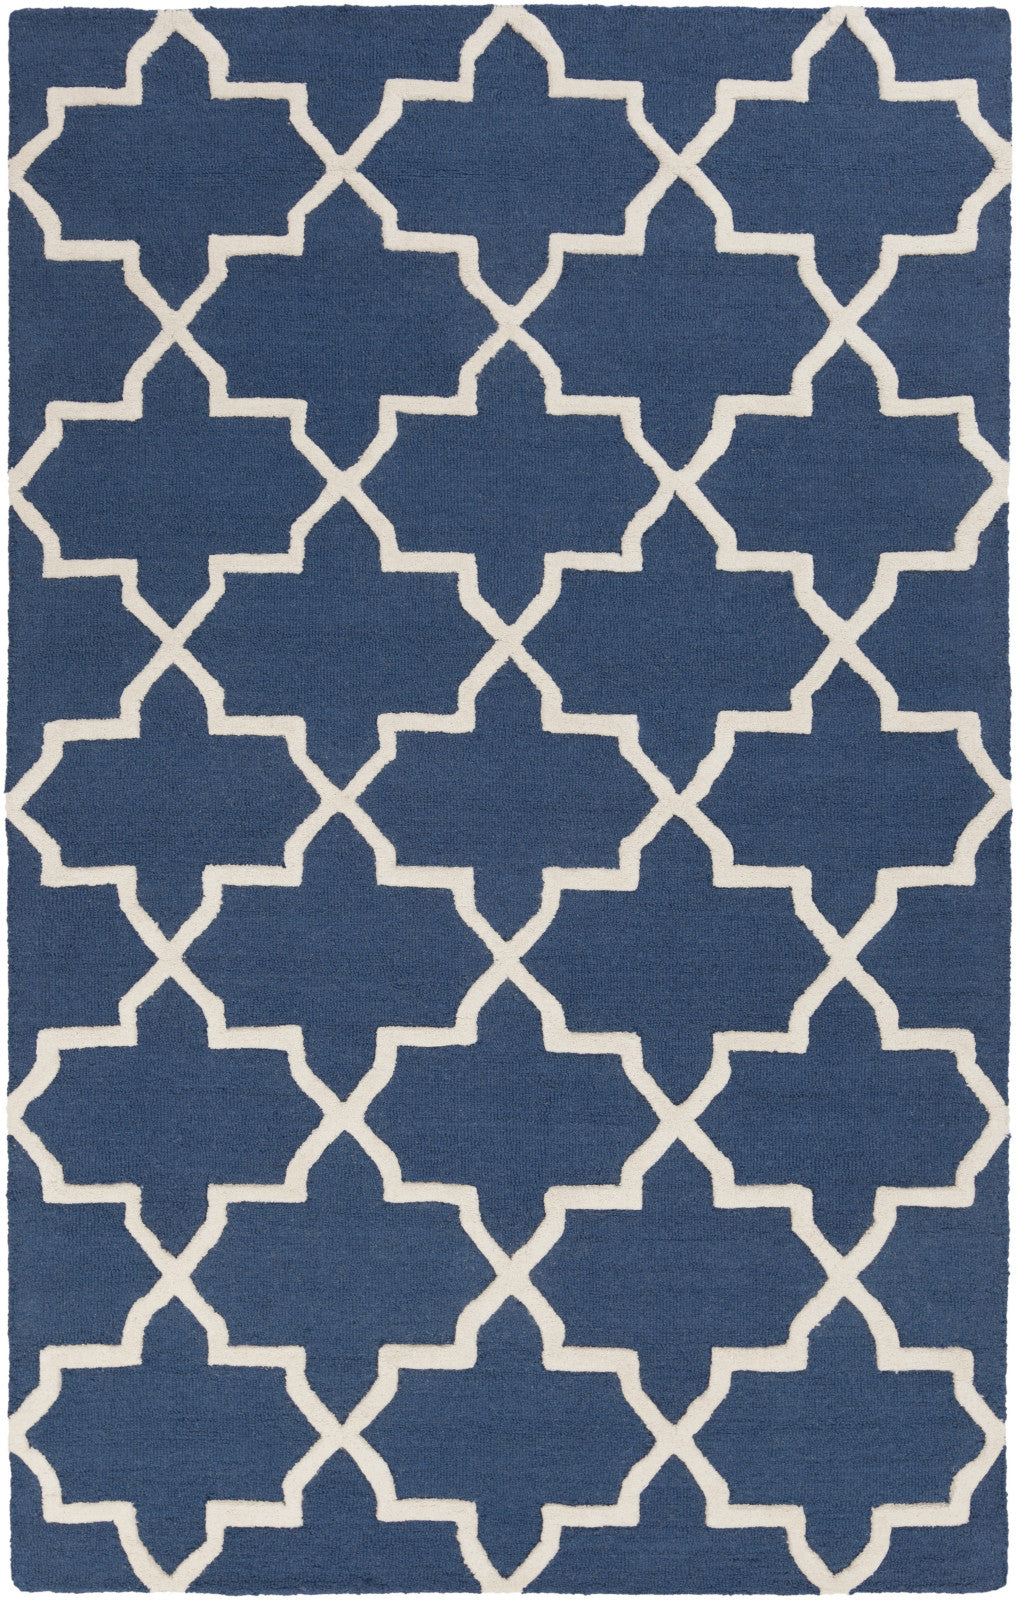 Artistic Weavers Pollack Keely Navy Blue/Ivory Area Rug main image